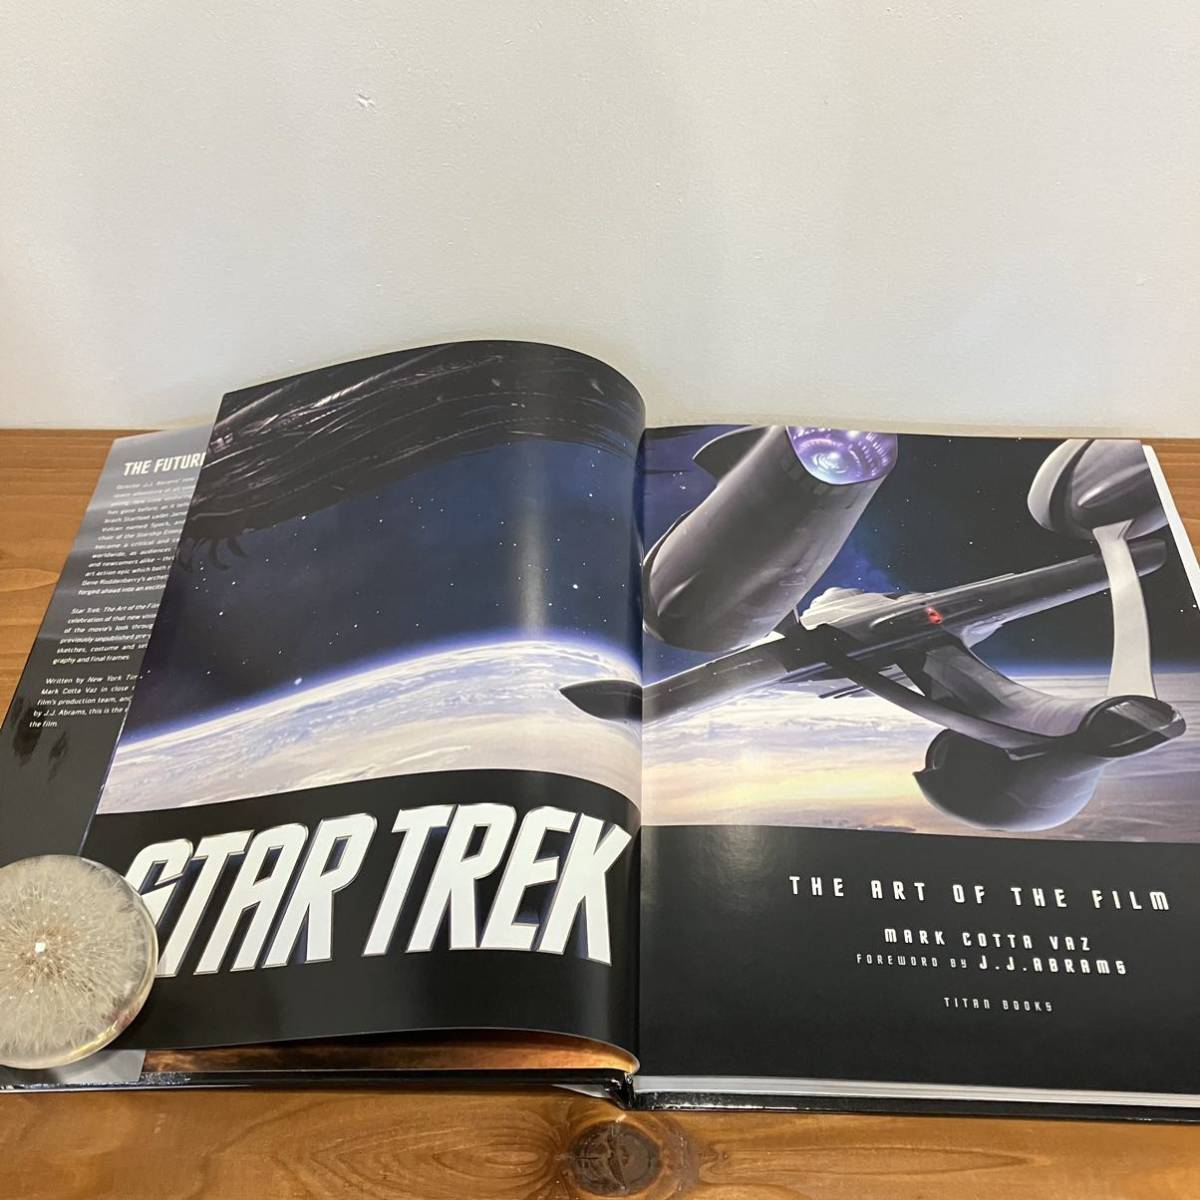 221217 Star Trek foreign book [STAR TREK THE ART OF THE FILM]2009 year * creation material collection * rare beautiful goods 